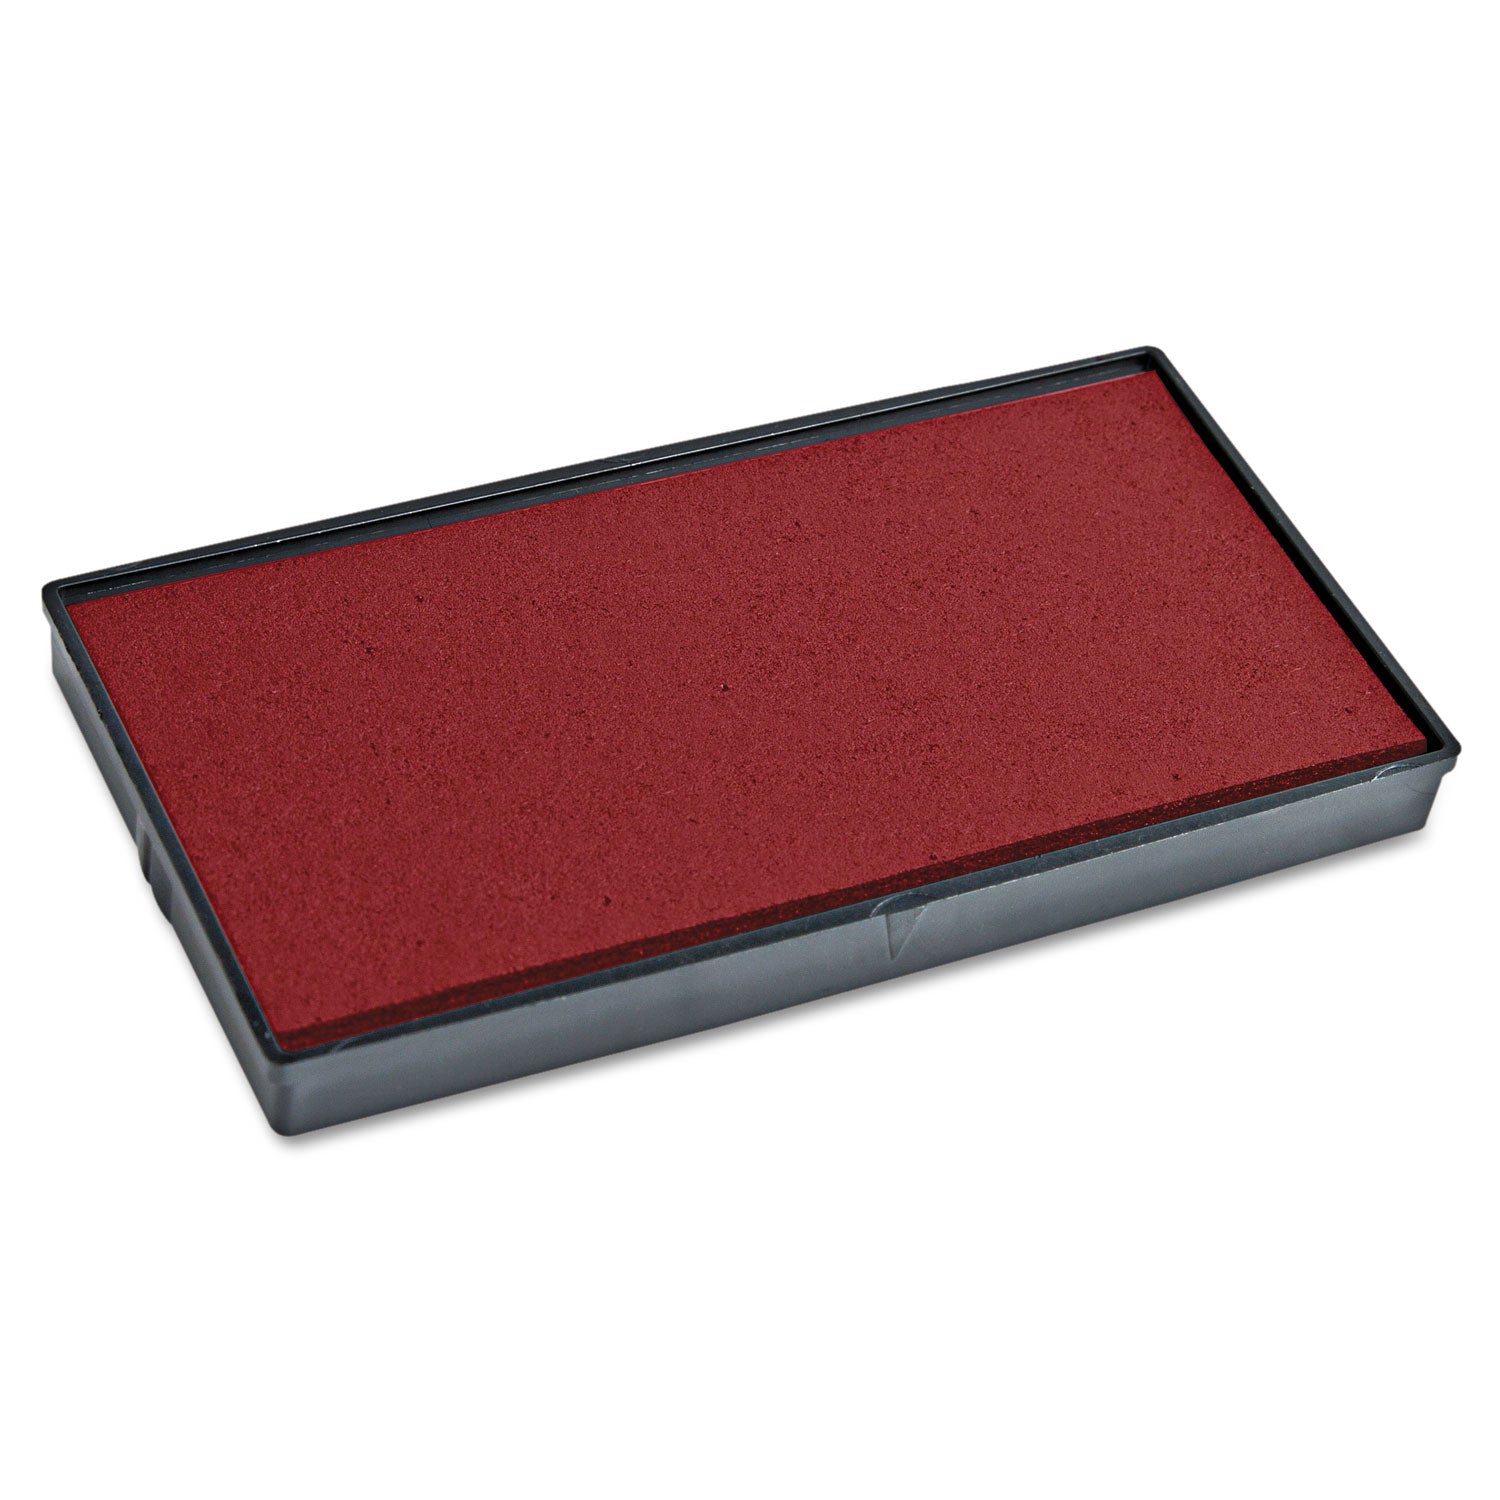 Replacement Ink Pad for 2000PLUS 1SI10P, 1" x 0.25", Red - 